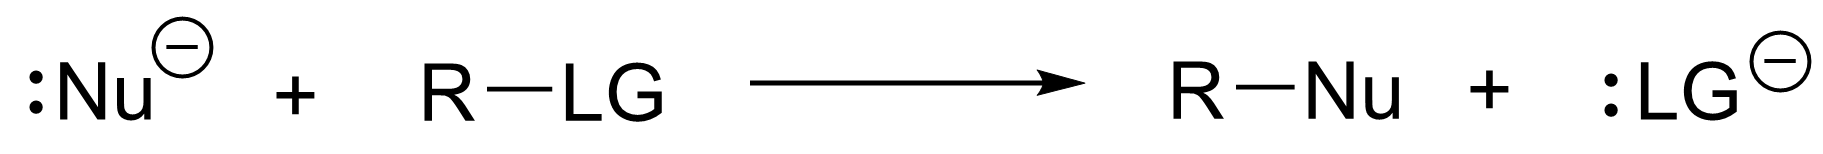 Nucleophile (Nu with one lone pair and a negative charge), plus, R connected to LC by a line on the left side of a horizontal arrow. On the right is R connected to Nu and LG is an anion.